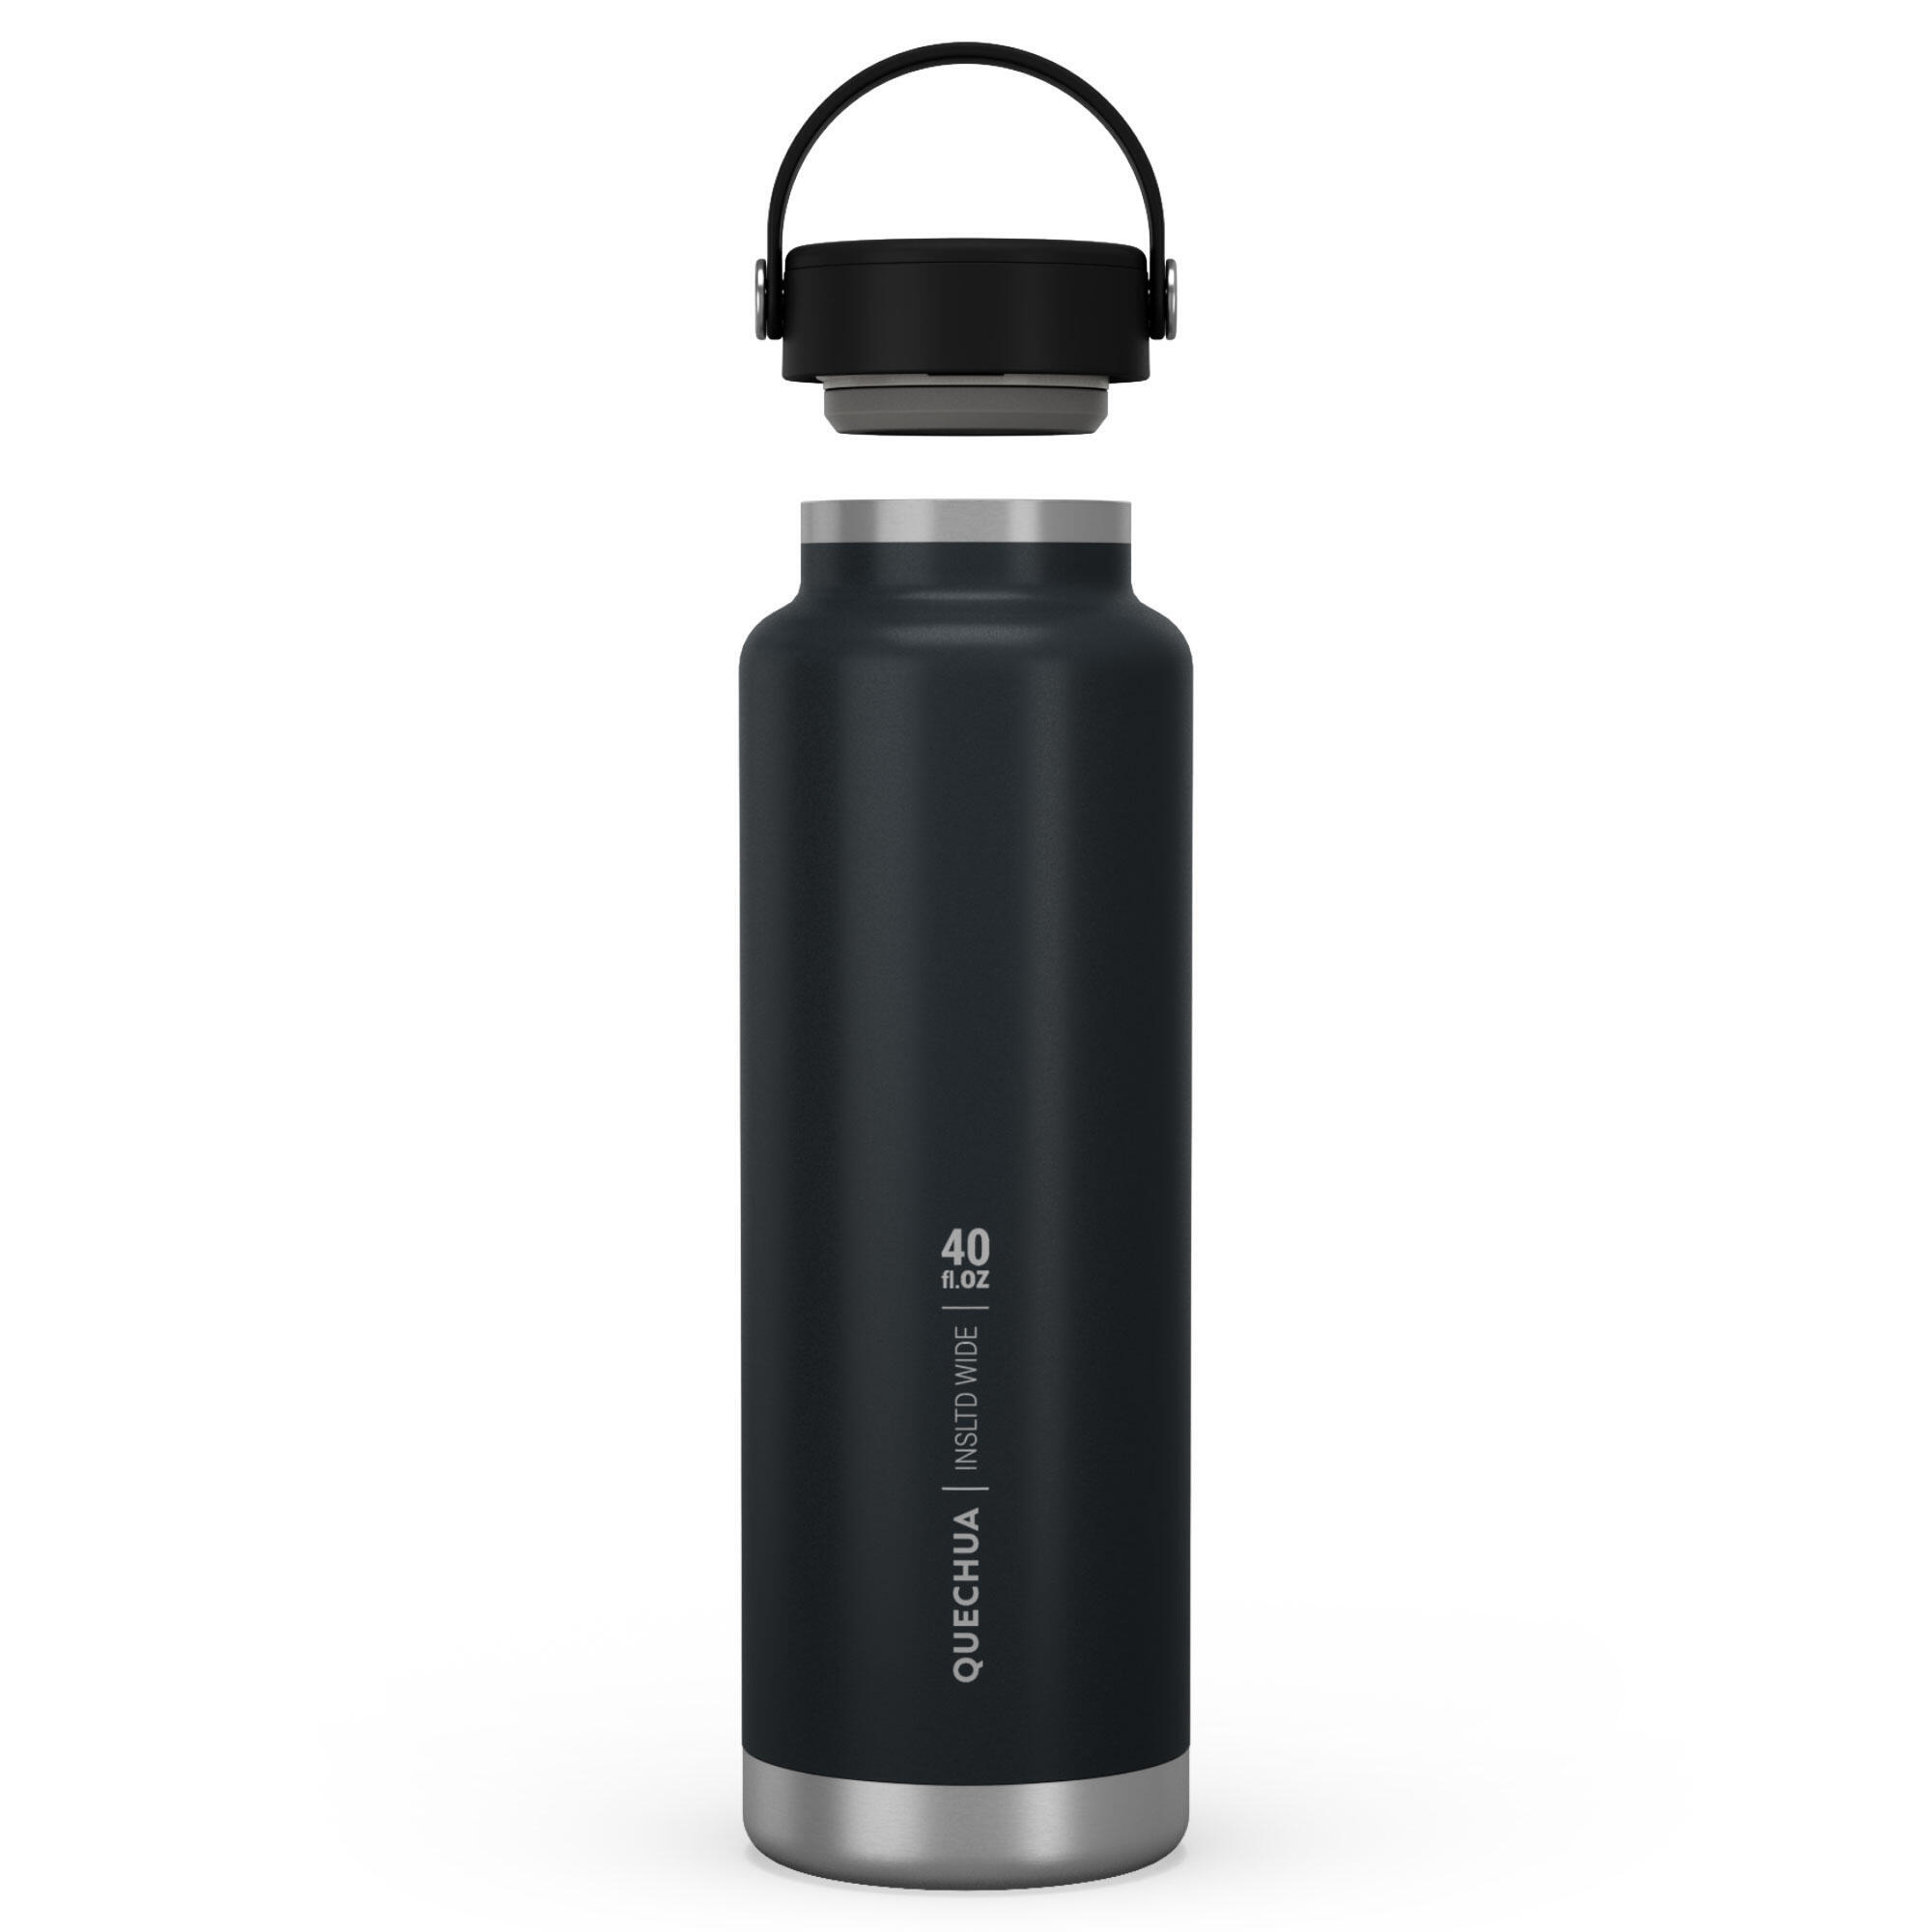 Thermal MH100 bottle (stainless steel, double vacuum wall) 1.2L wide neck, black 2/10